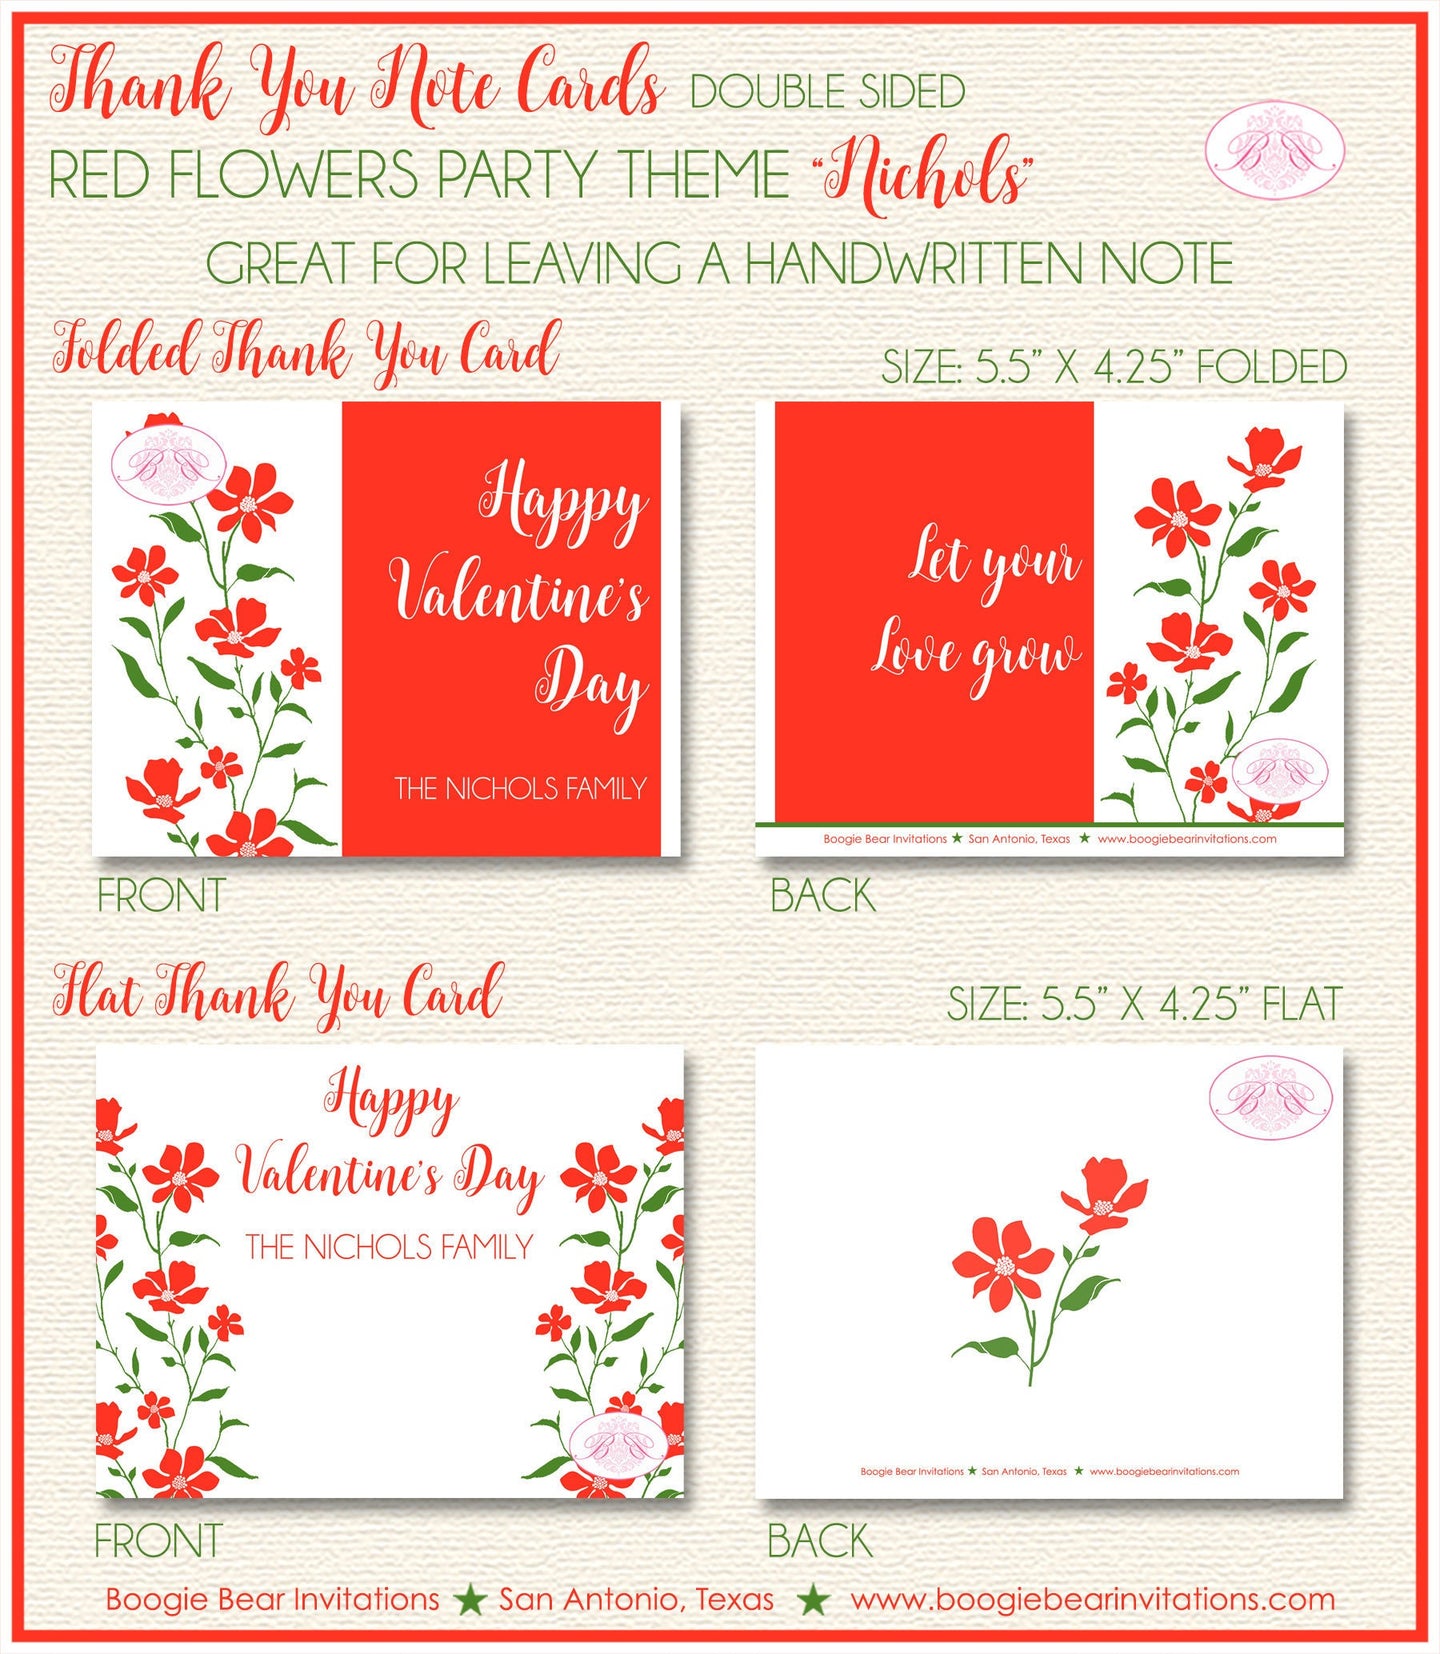 Red Flowers Valentine Thank You Card Party Day Birthday Holiday Dinner Love Green White Garden Boogie Bear Invitations Nichols Theme Printed